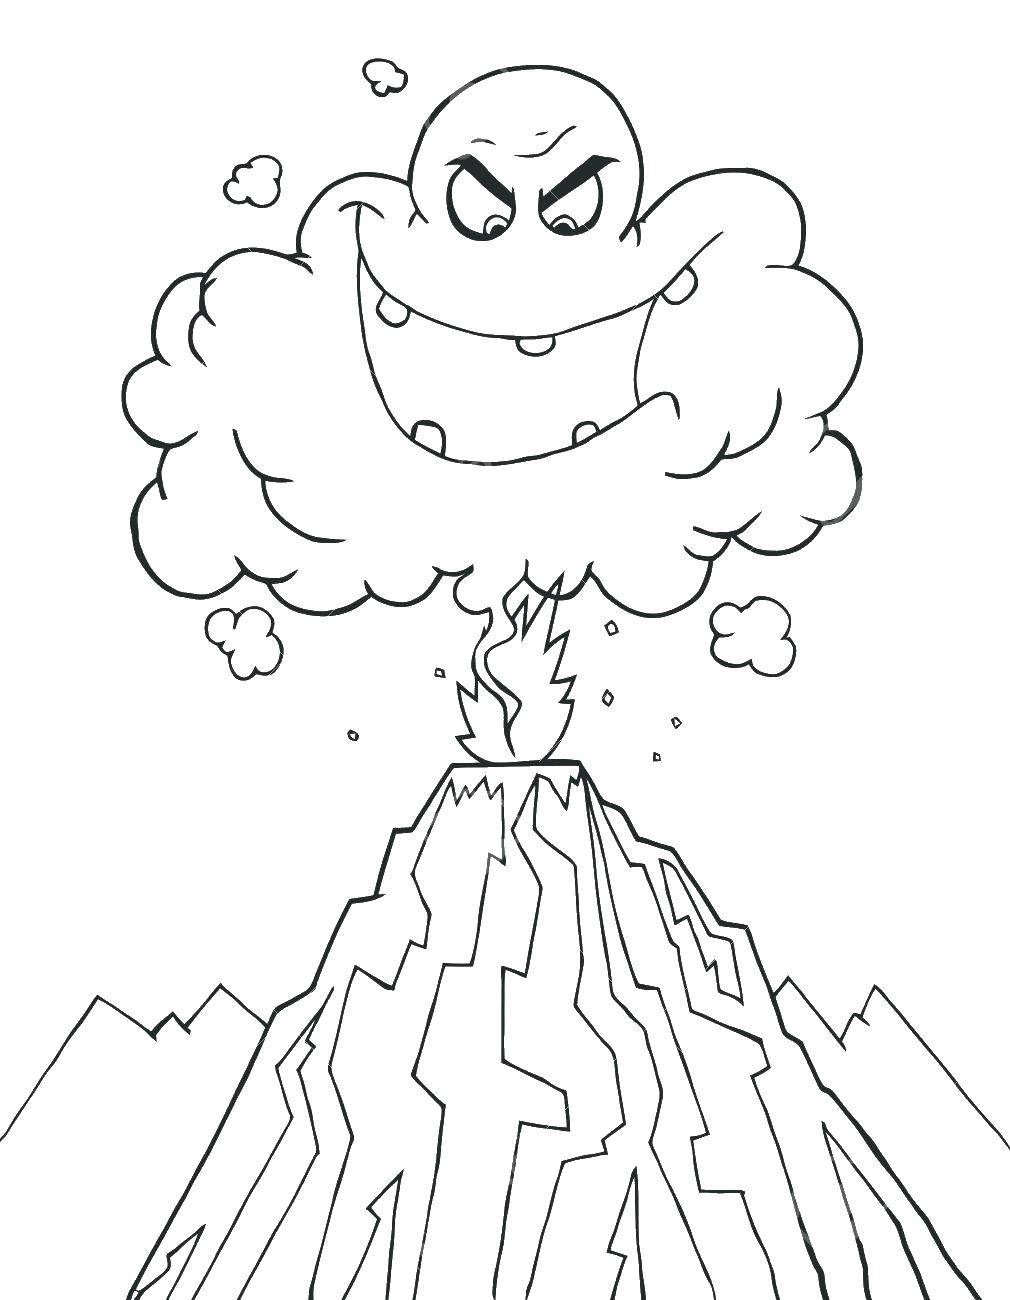 Coloring The eruption of the volcano and the smoke. Category Volcano. Tags:  eruption, smoke.